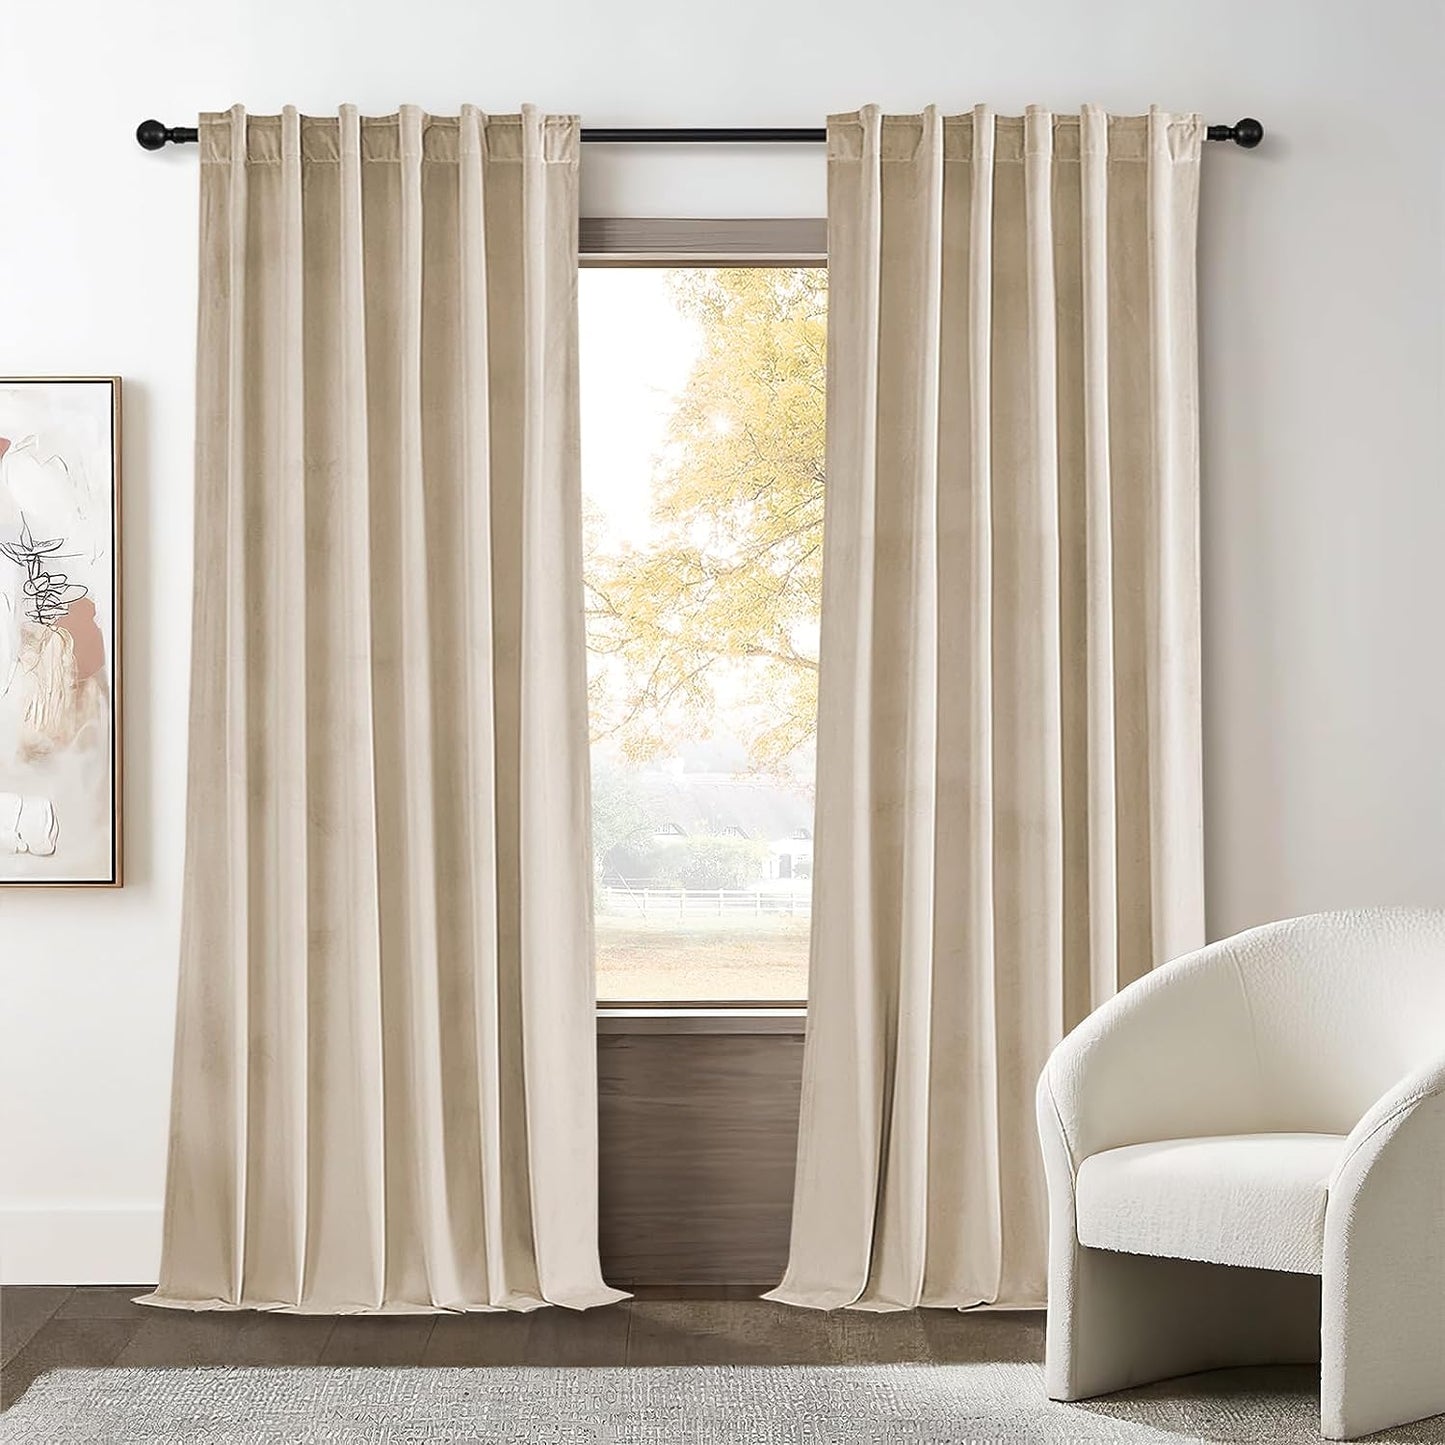 Topfinel Olive Green Velvet Curtains 84 Inches Long for Living Room,Blackout Thermal Insulated Curtains for Bedroom,Back Tab Modern Window Treatment for Living Room,52X84 Inch Length,Olive Green  Top Fine Beige 52" X 90" 